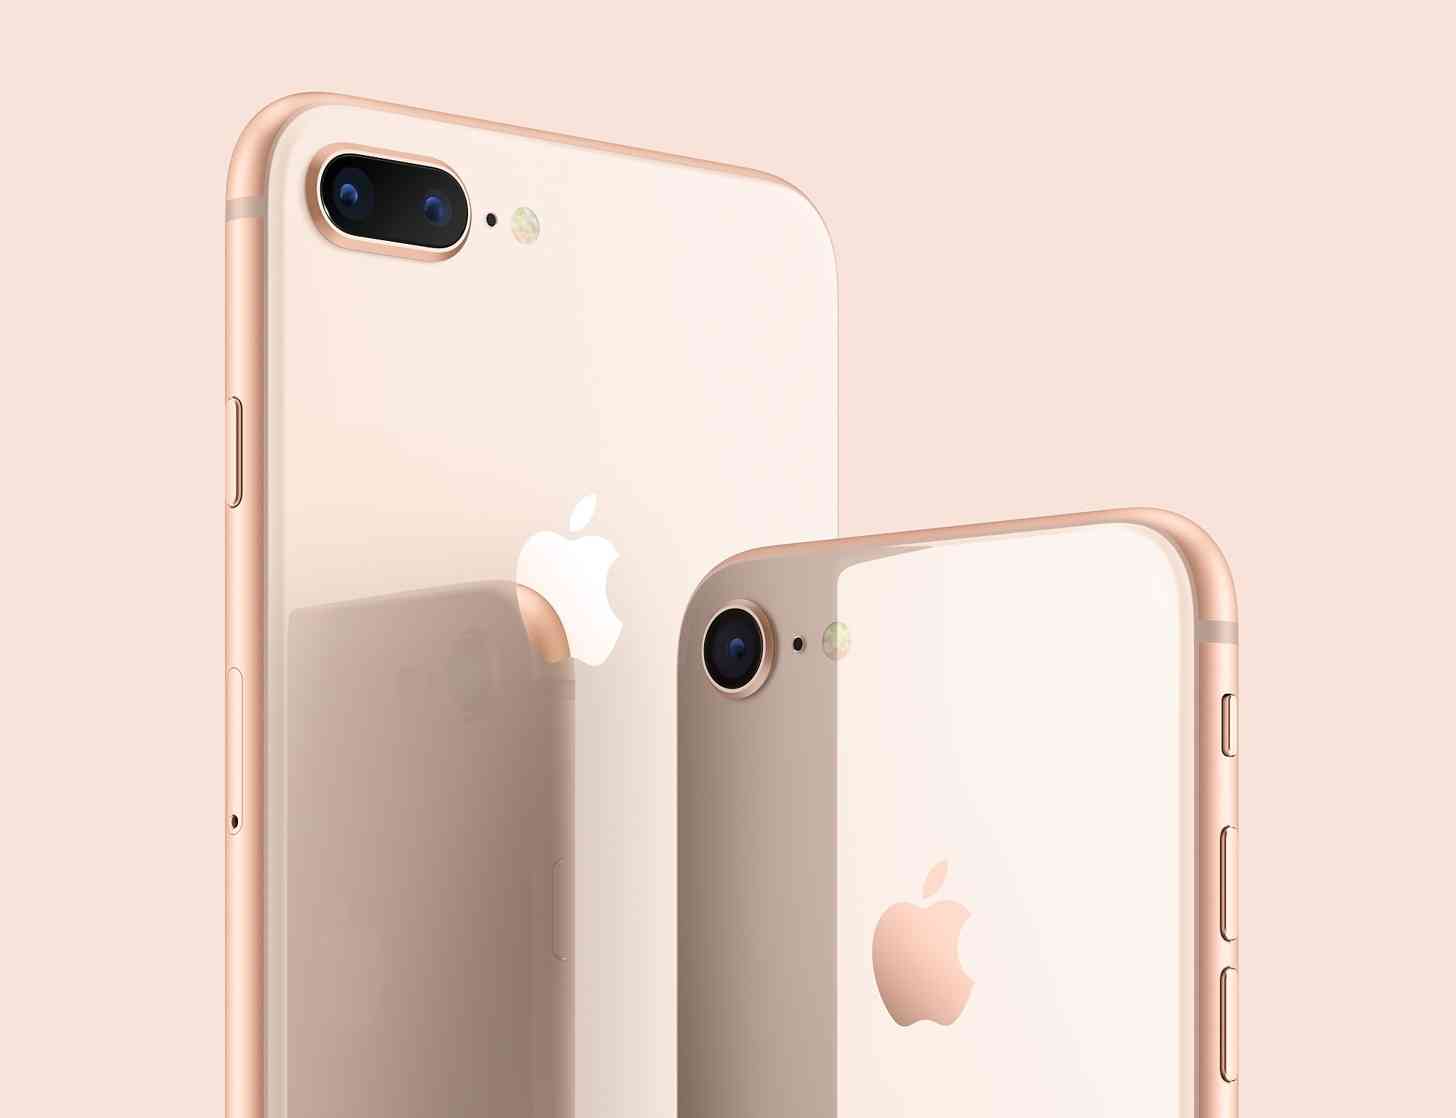 Apple iPhone 8 and 8 Plus